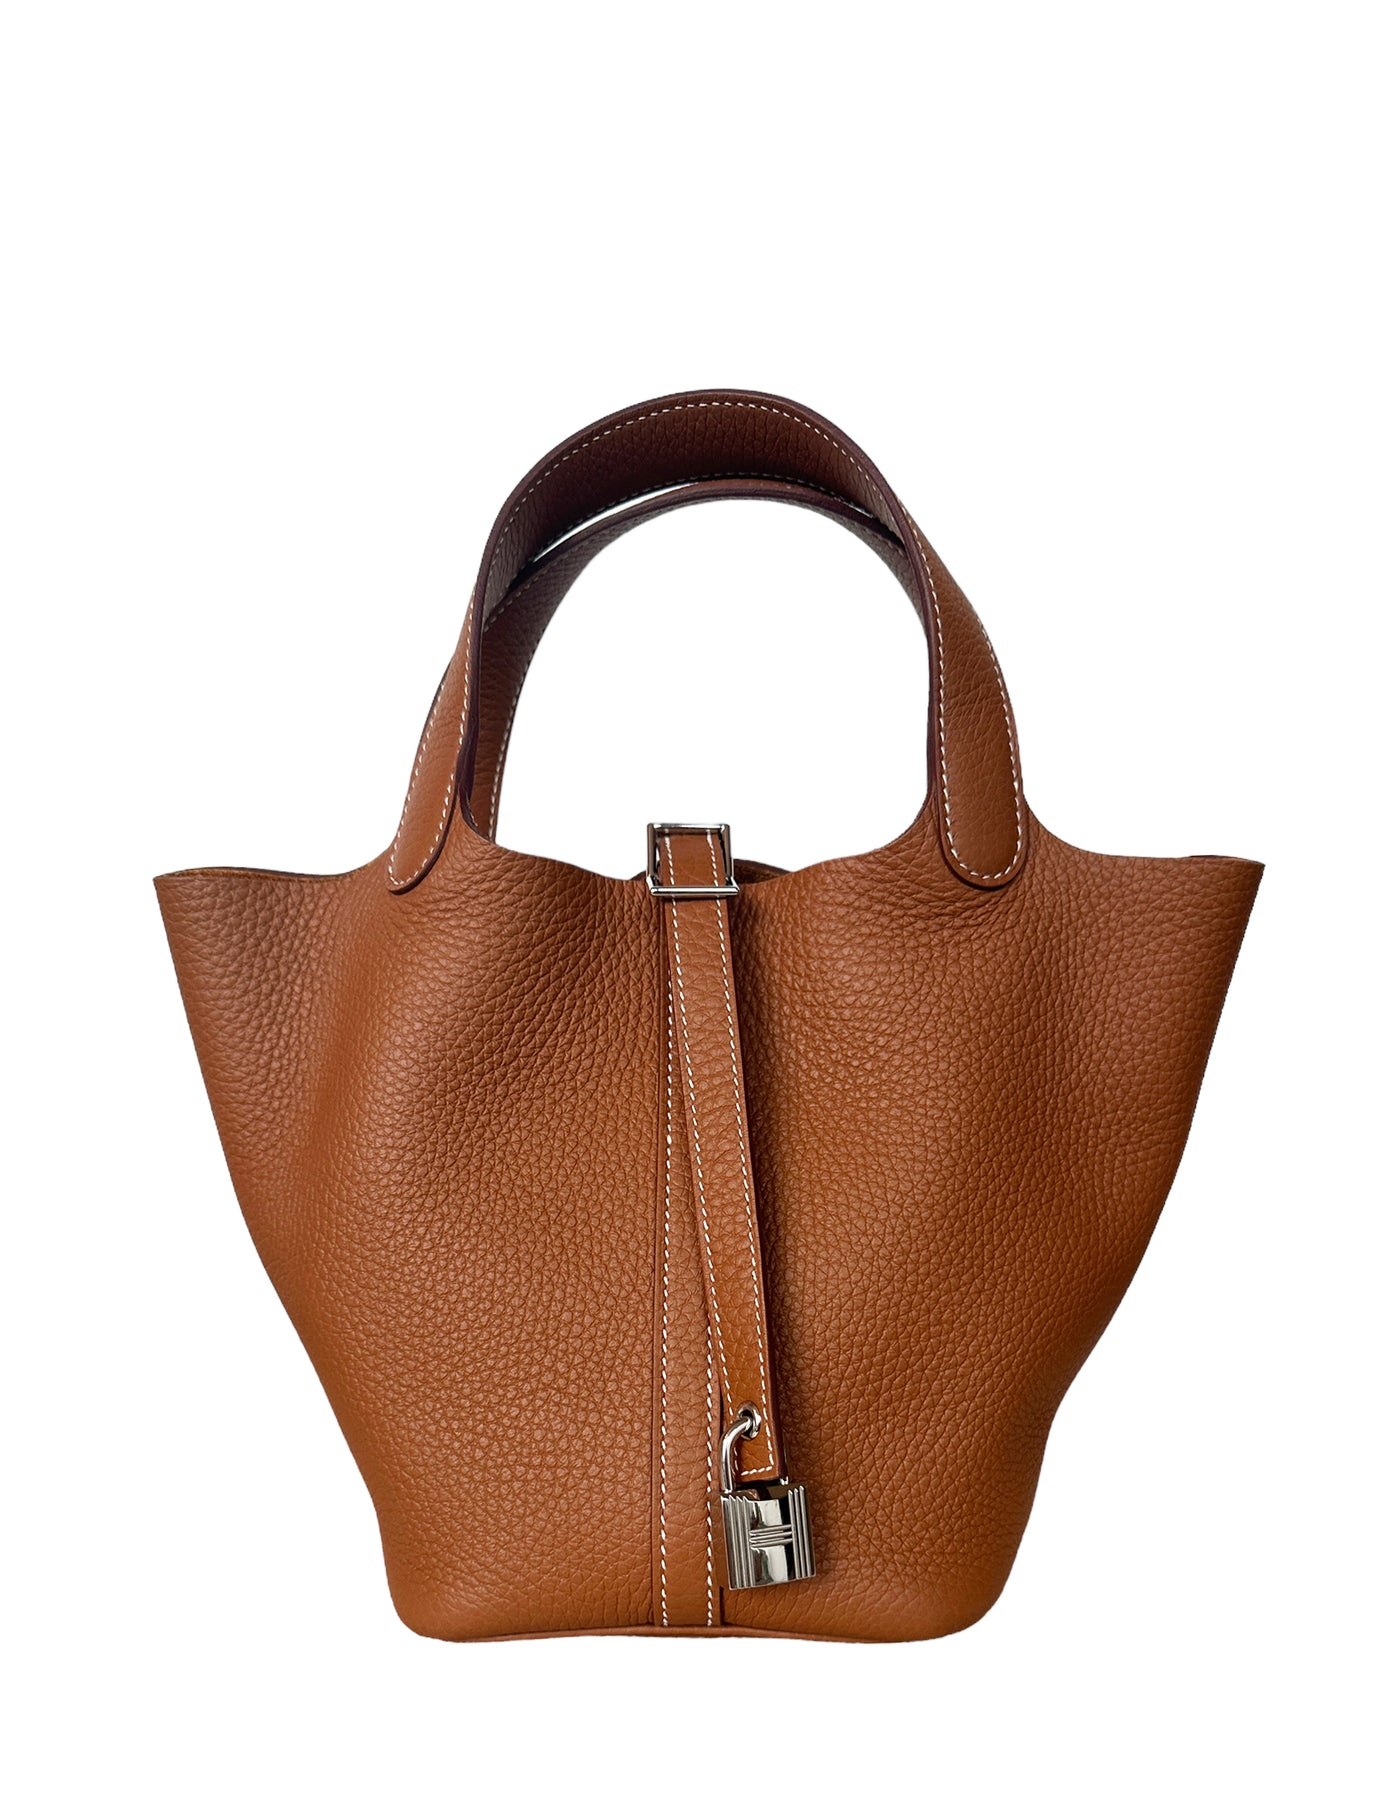 Hermes Gold Tan Taurillon Clemence Leather Picotin Lock 18 PM Bag